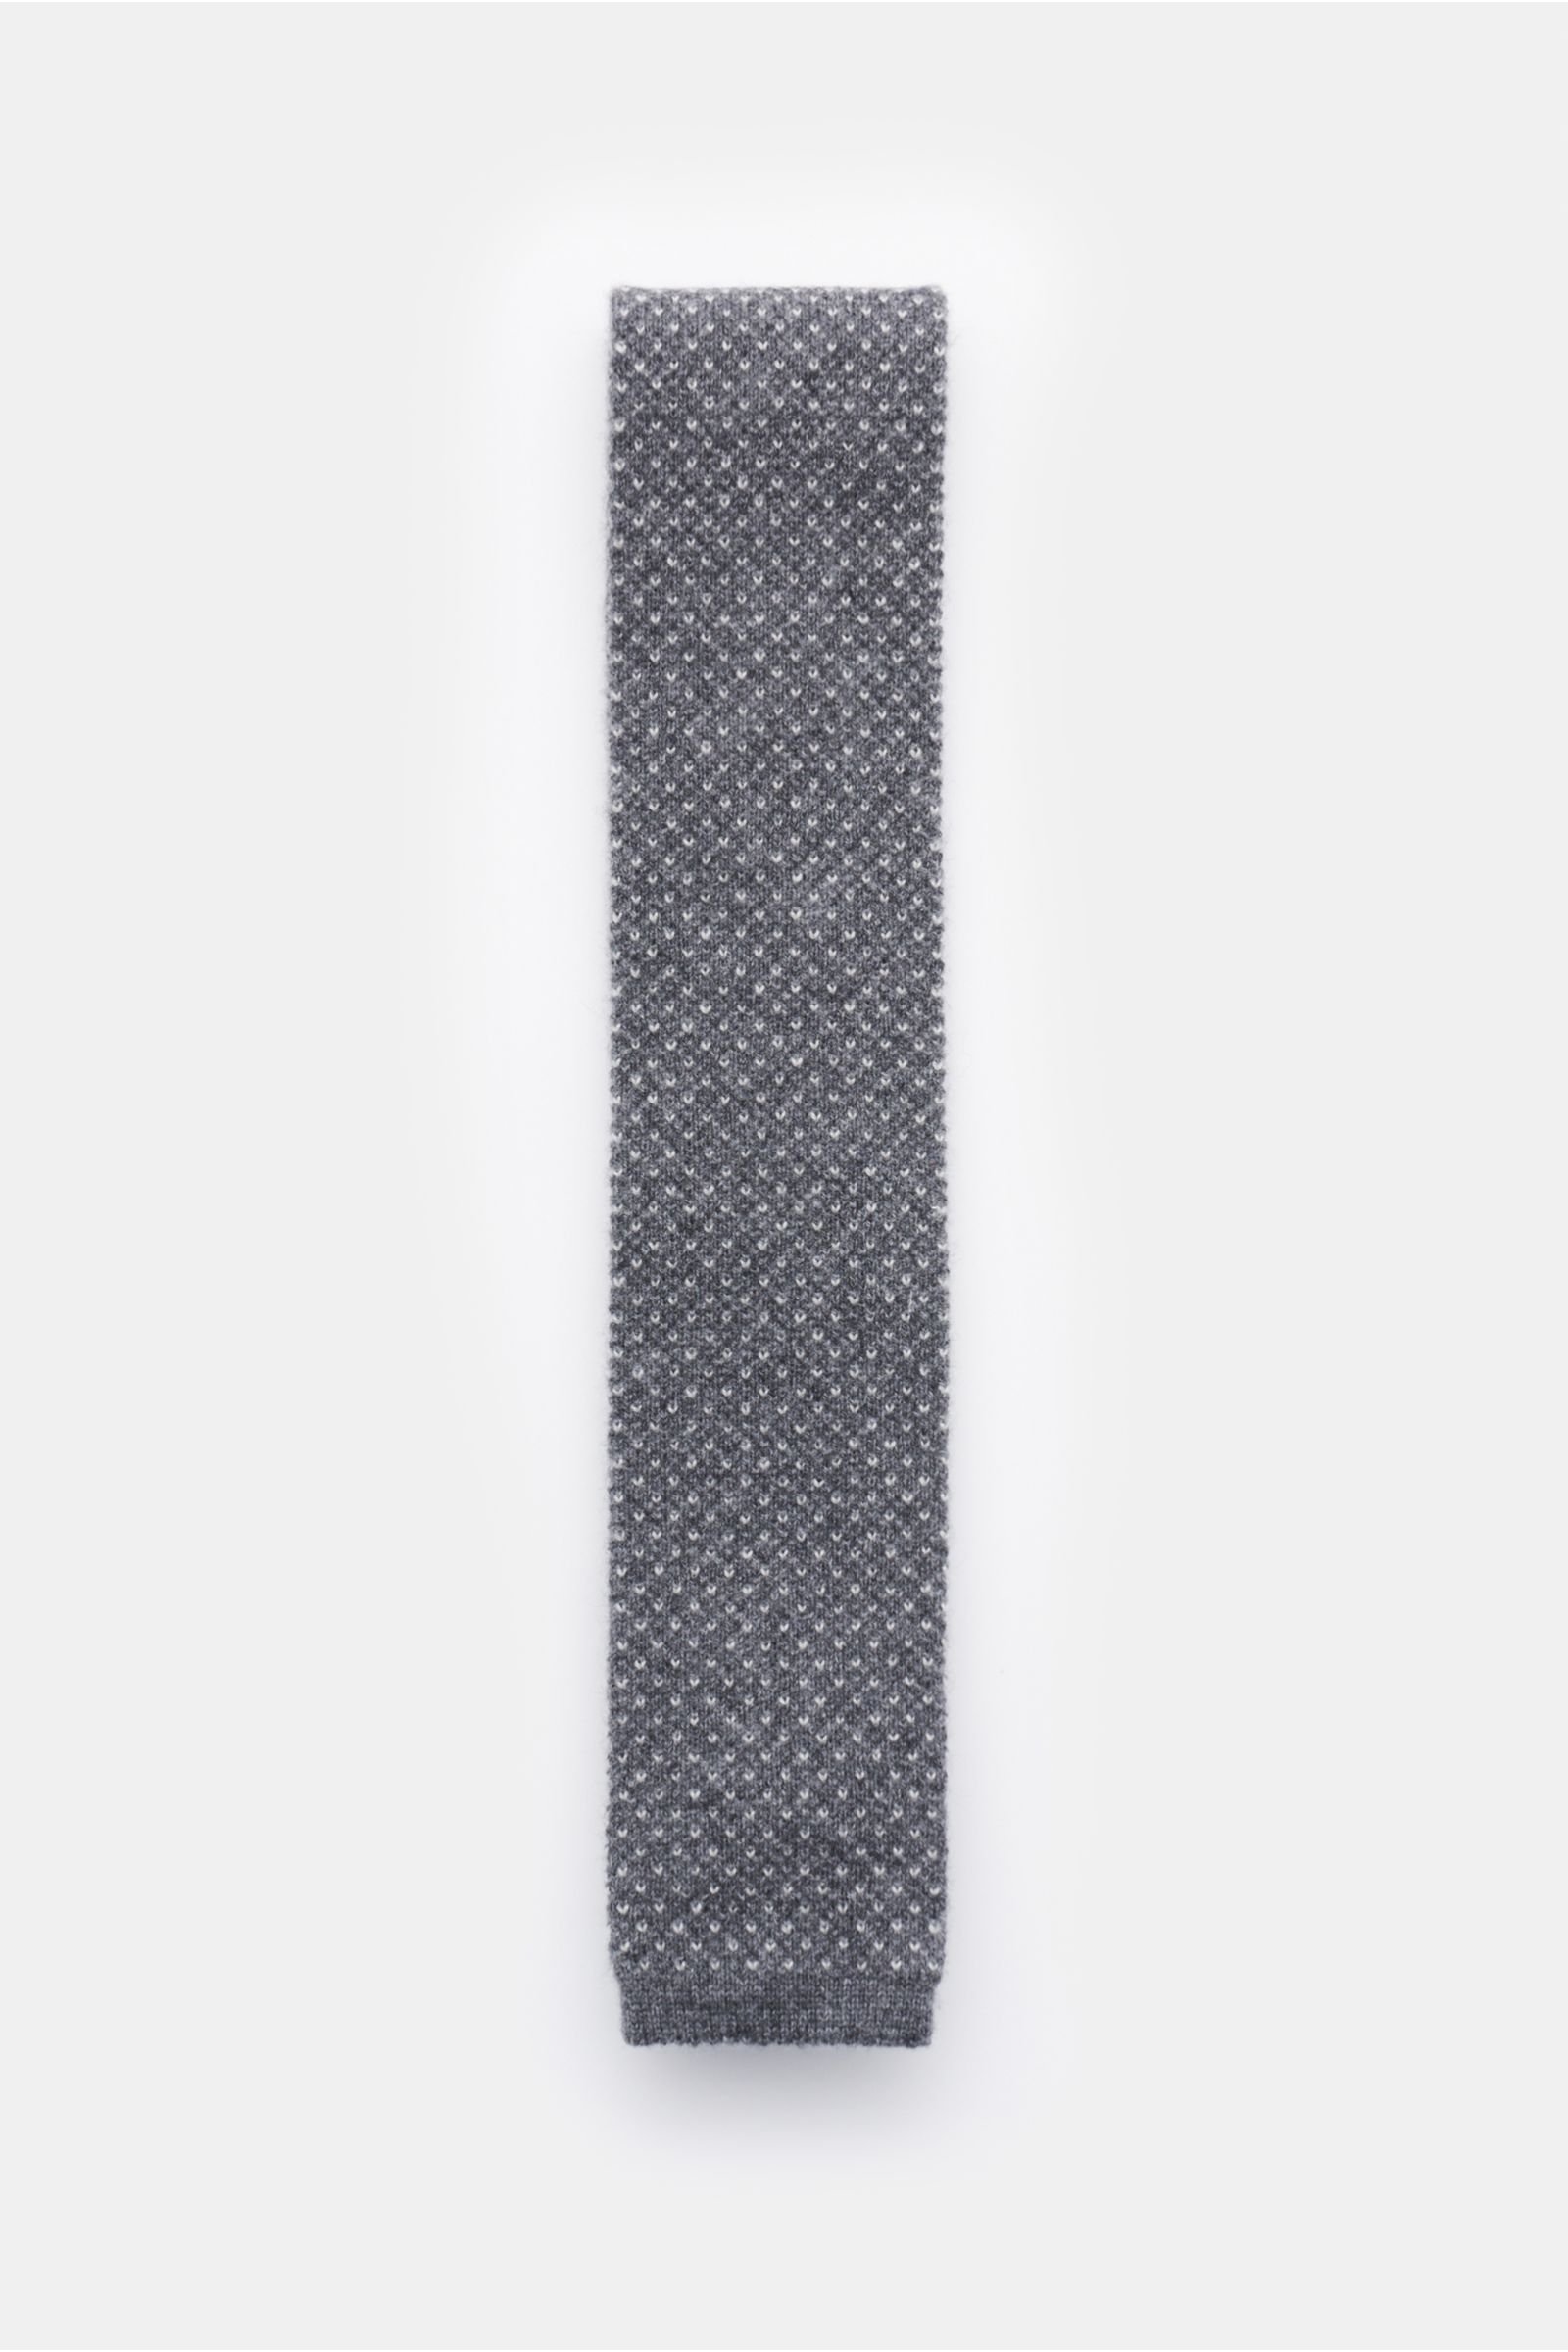 Cashmere knitted tie grey/white patterned